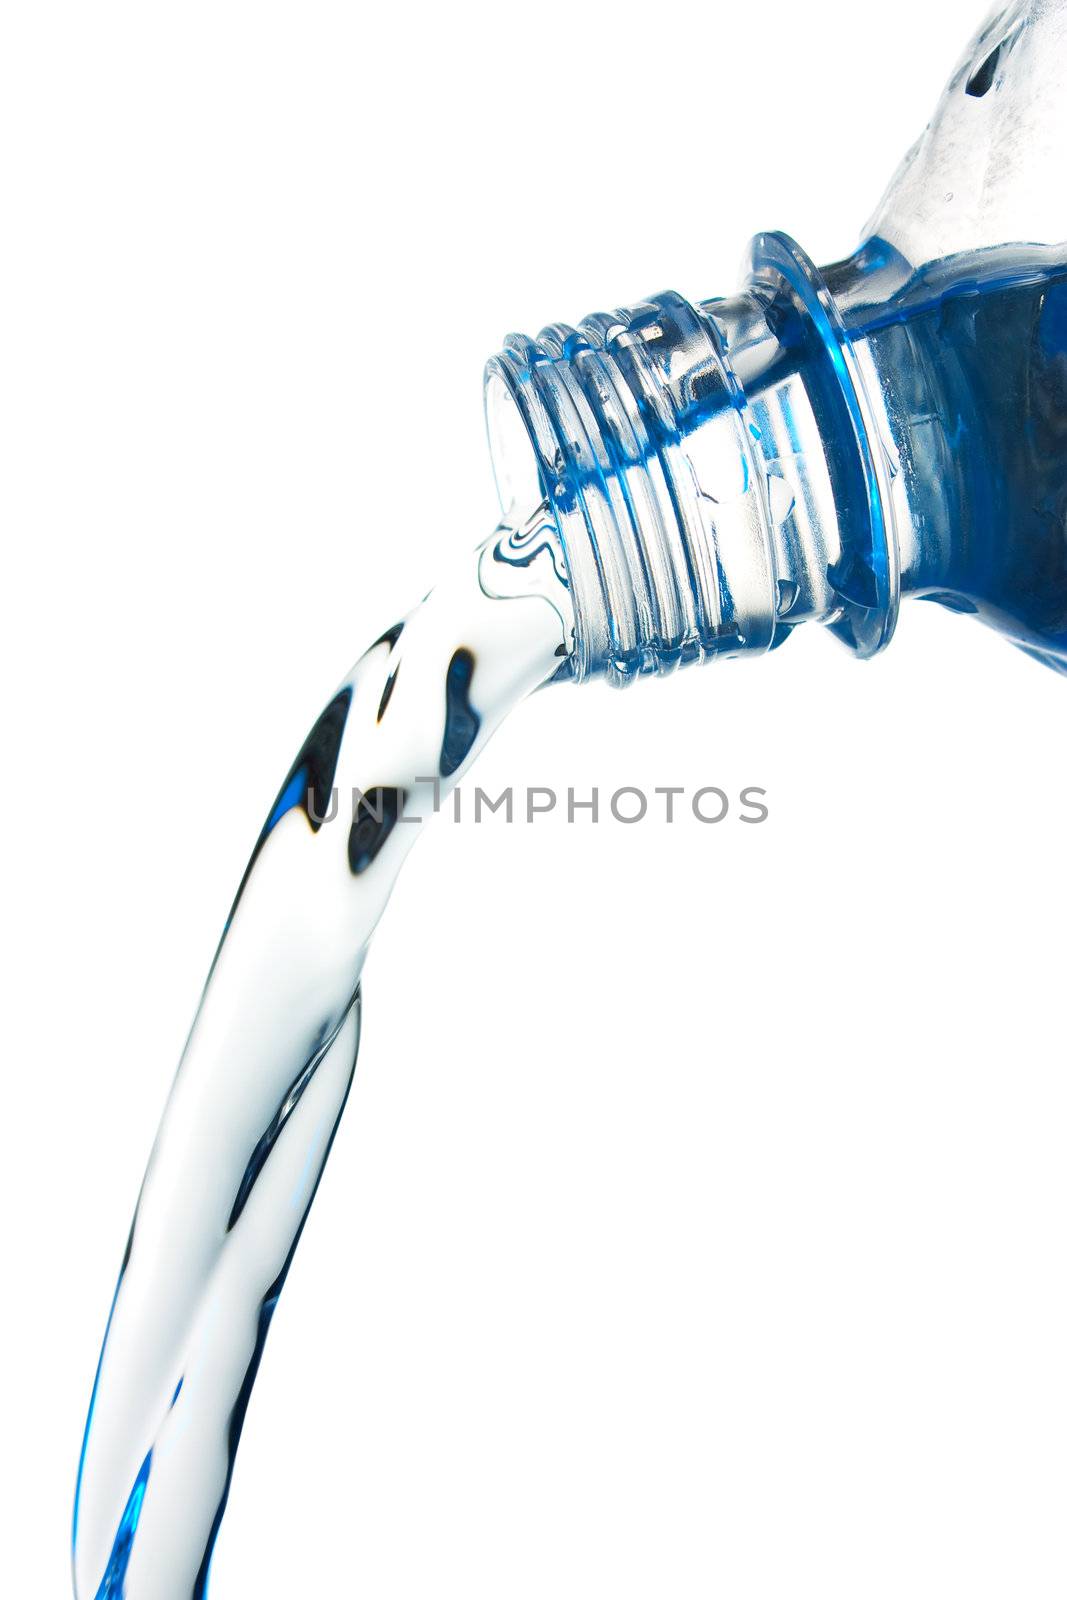 stream of water flows from the bottle Isolated on white background